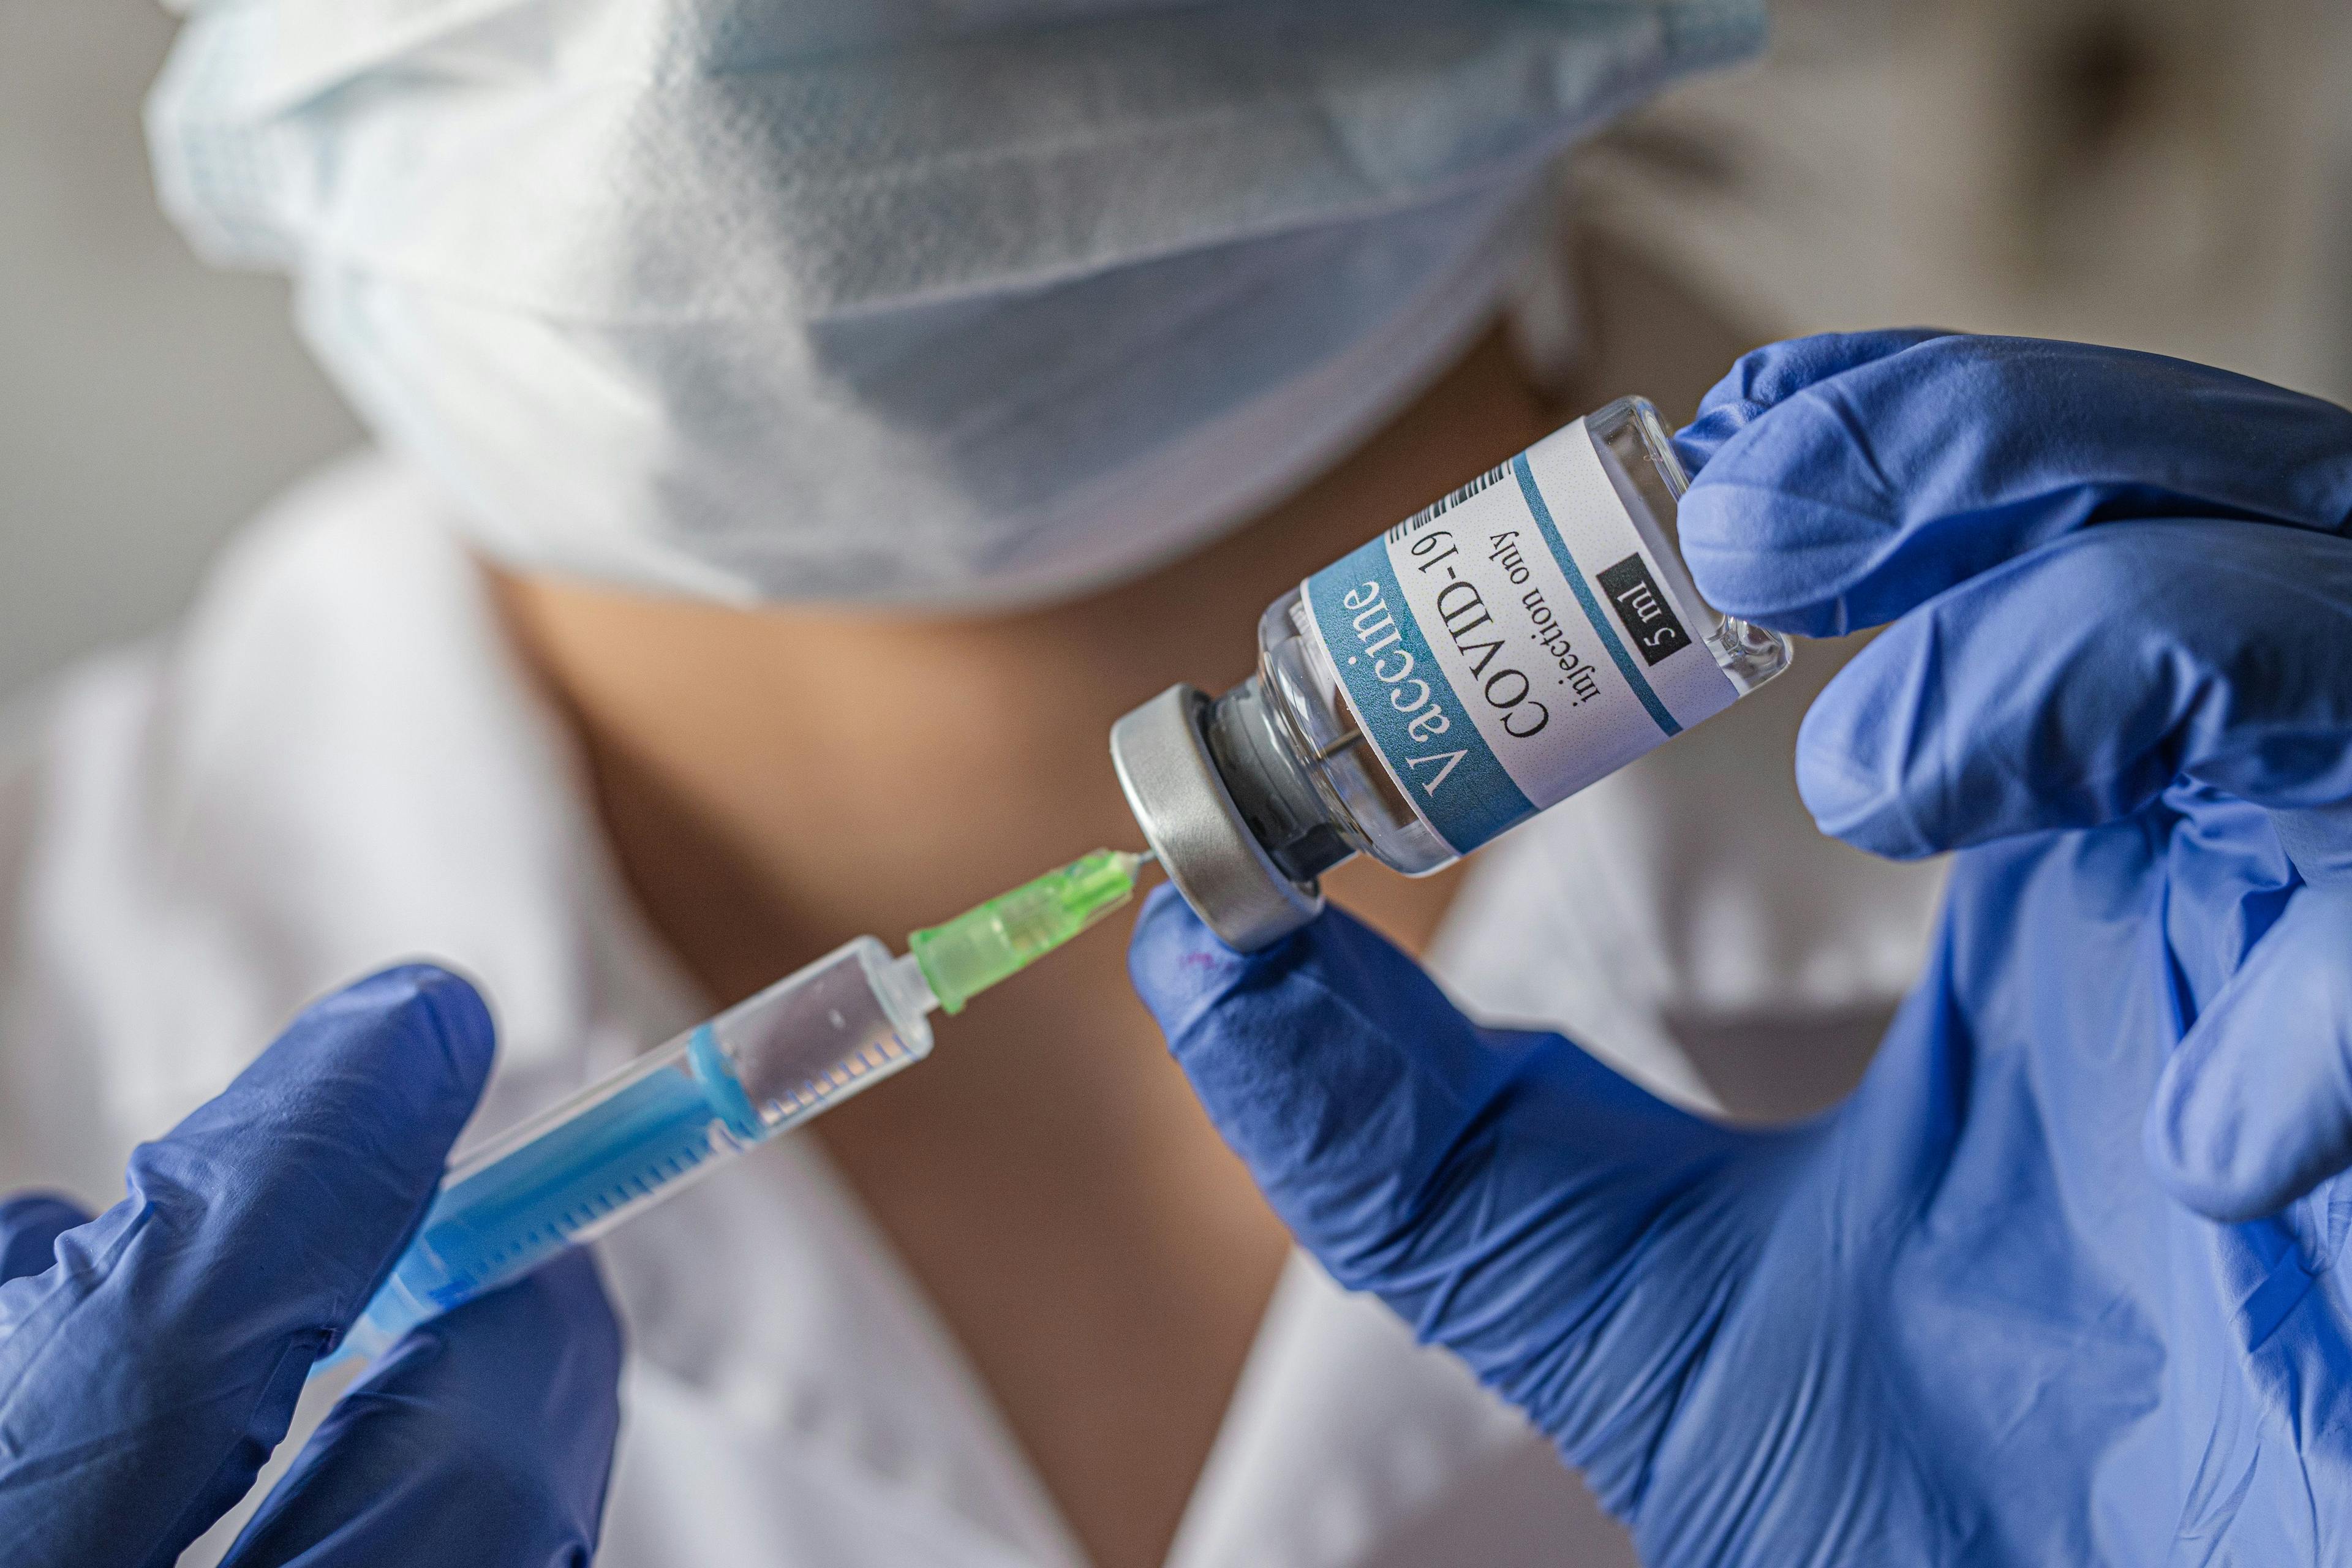 New CDC Study Shows mRNA COVID-19 Vaccines are 94% Effective in Health Care Professionals